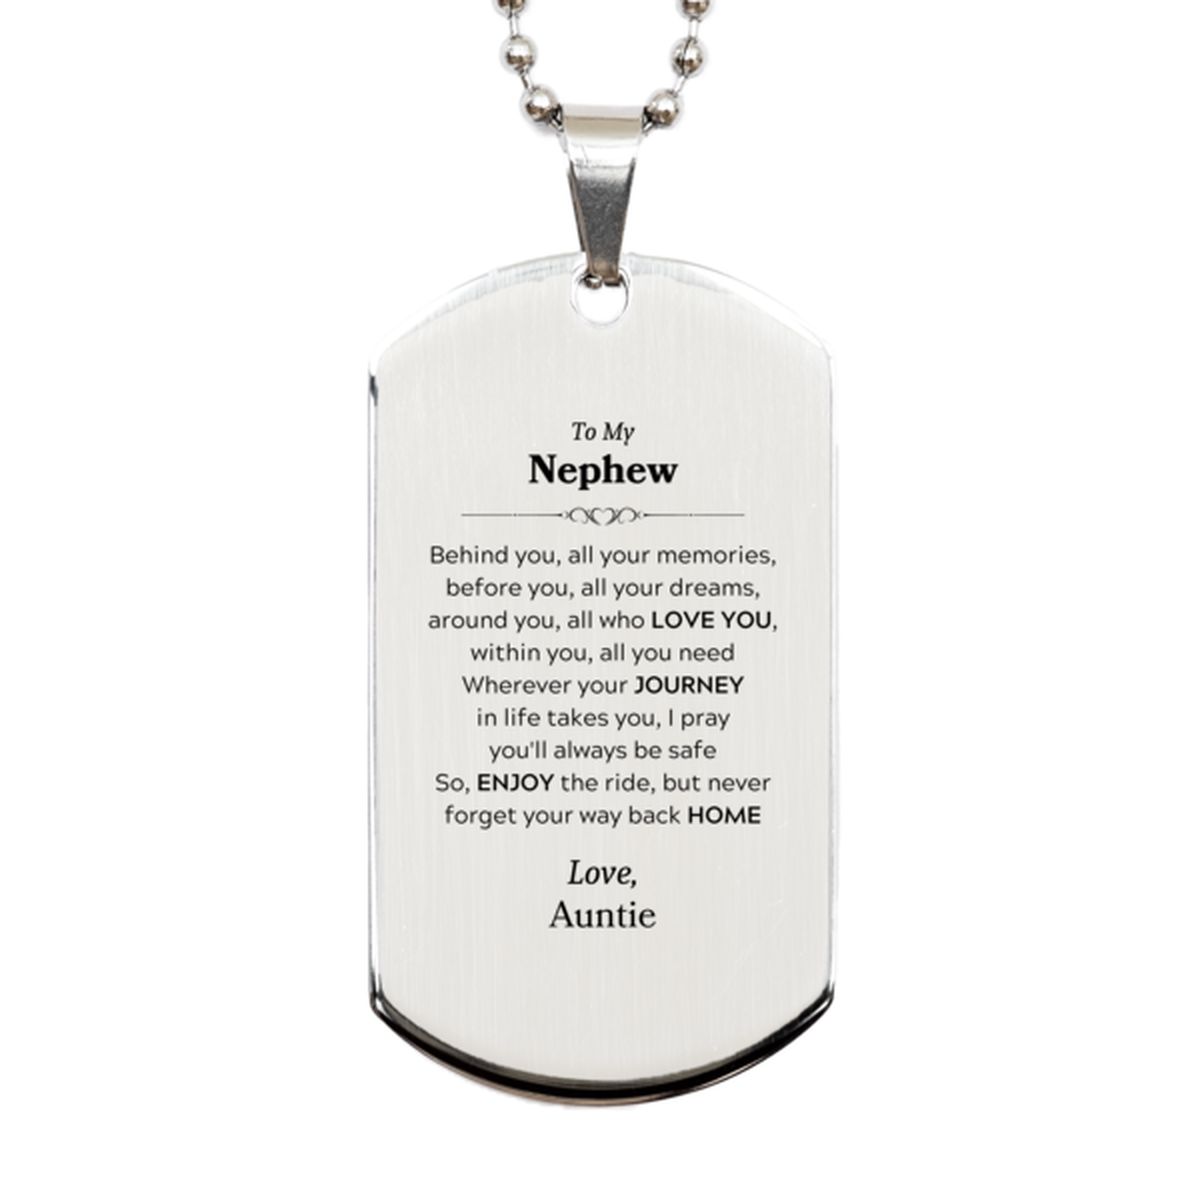 To My Nephew Graduation Gifts from Auntie, Nephew Silver Dog Tag Christmas Birthday Gifts for Nephew Behind you, all your memories, before you, all your dreams. Love, Auntie